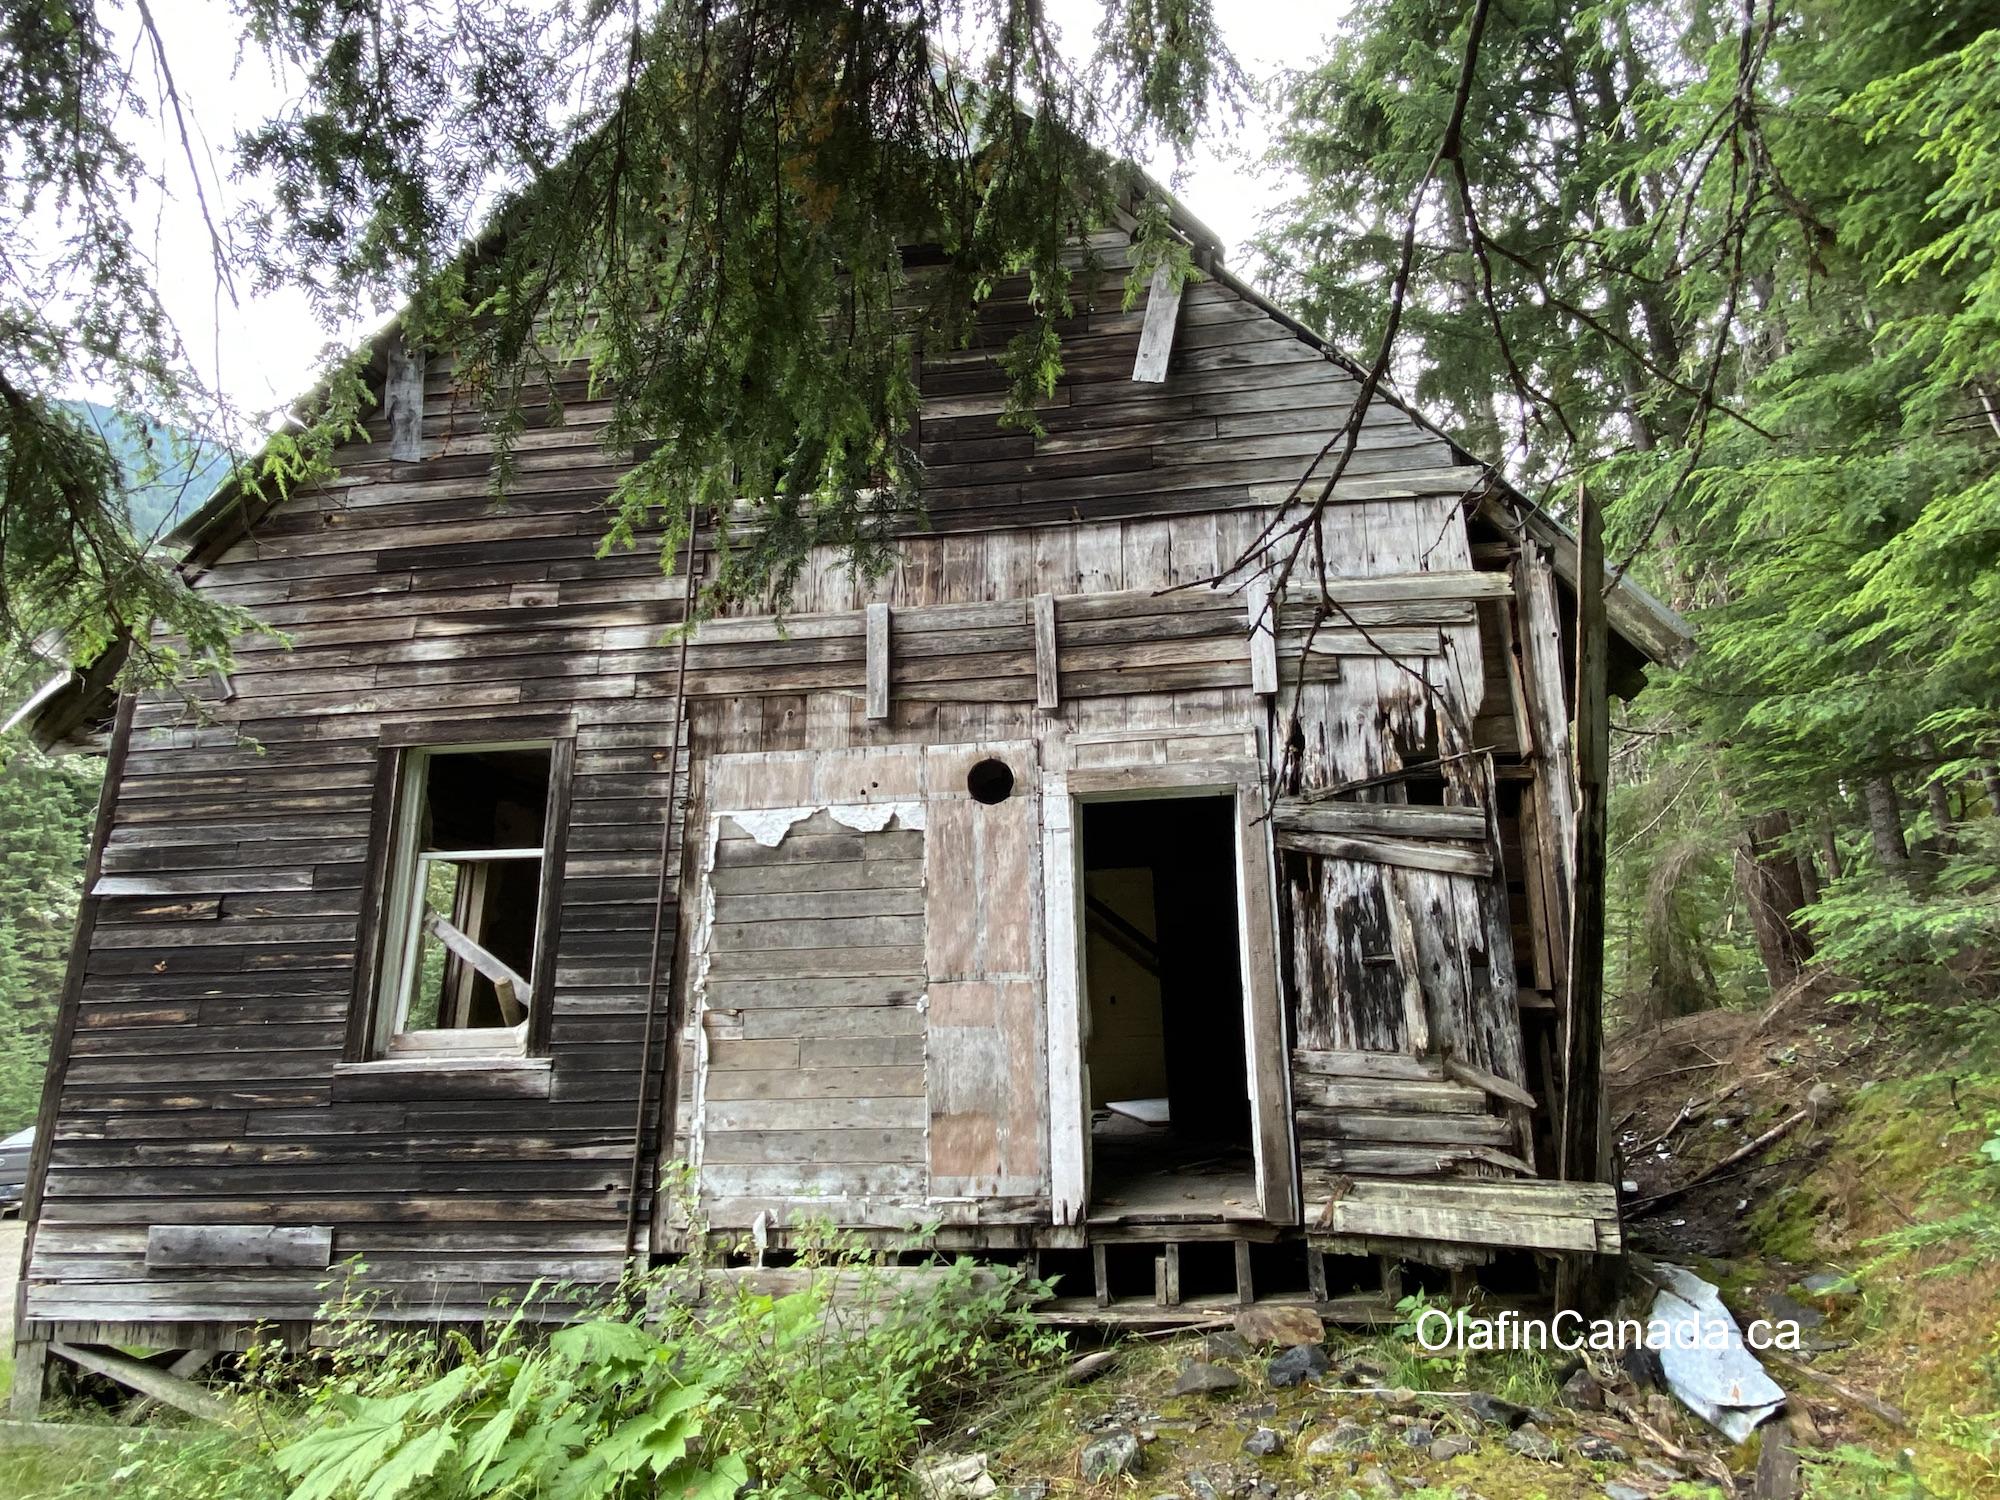 Station house in Cody, seen from the back #olafincanada #britishcolumbia #discoverbc #abandonedbc #cody